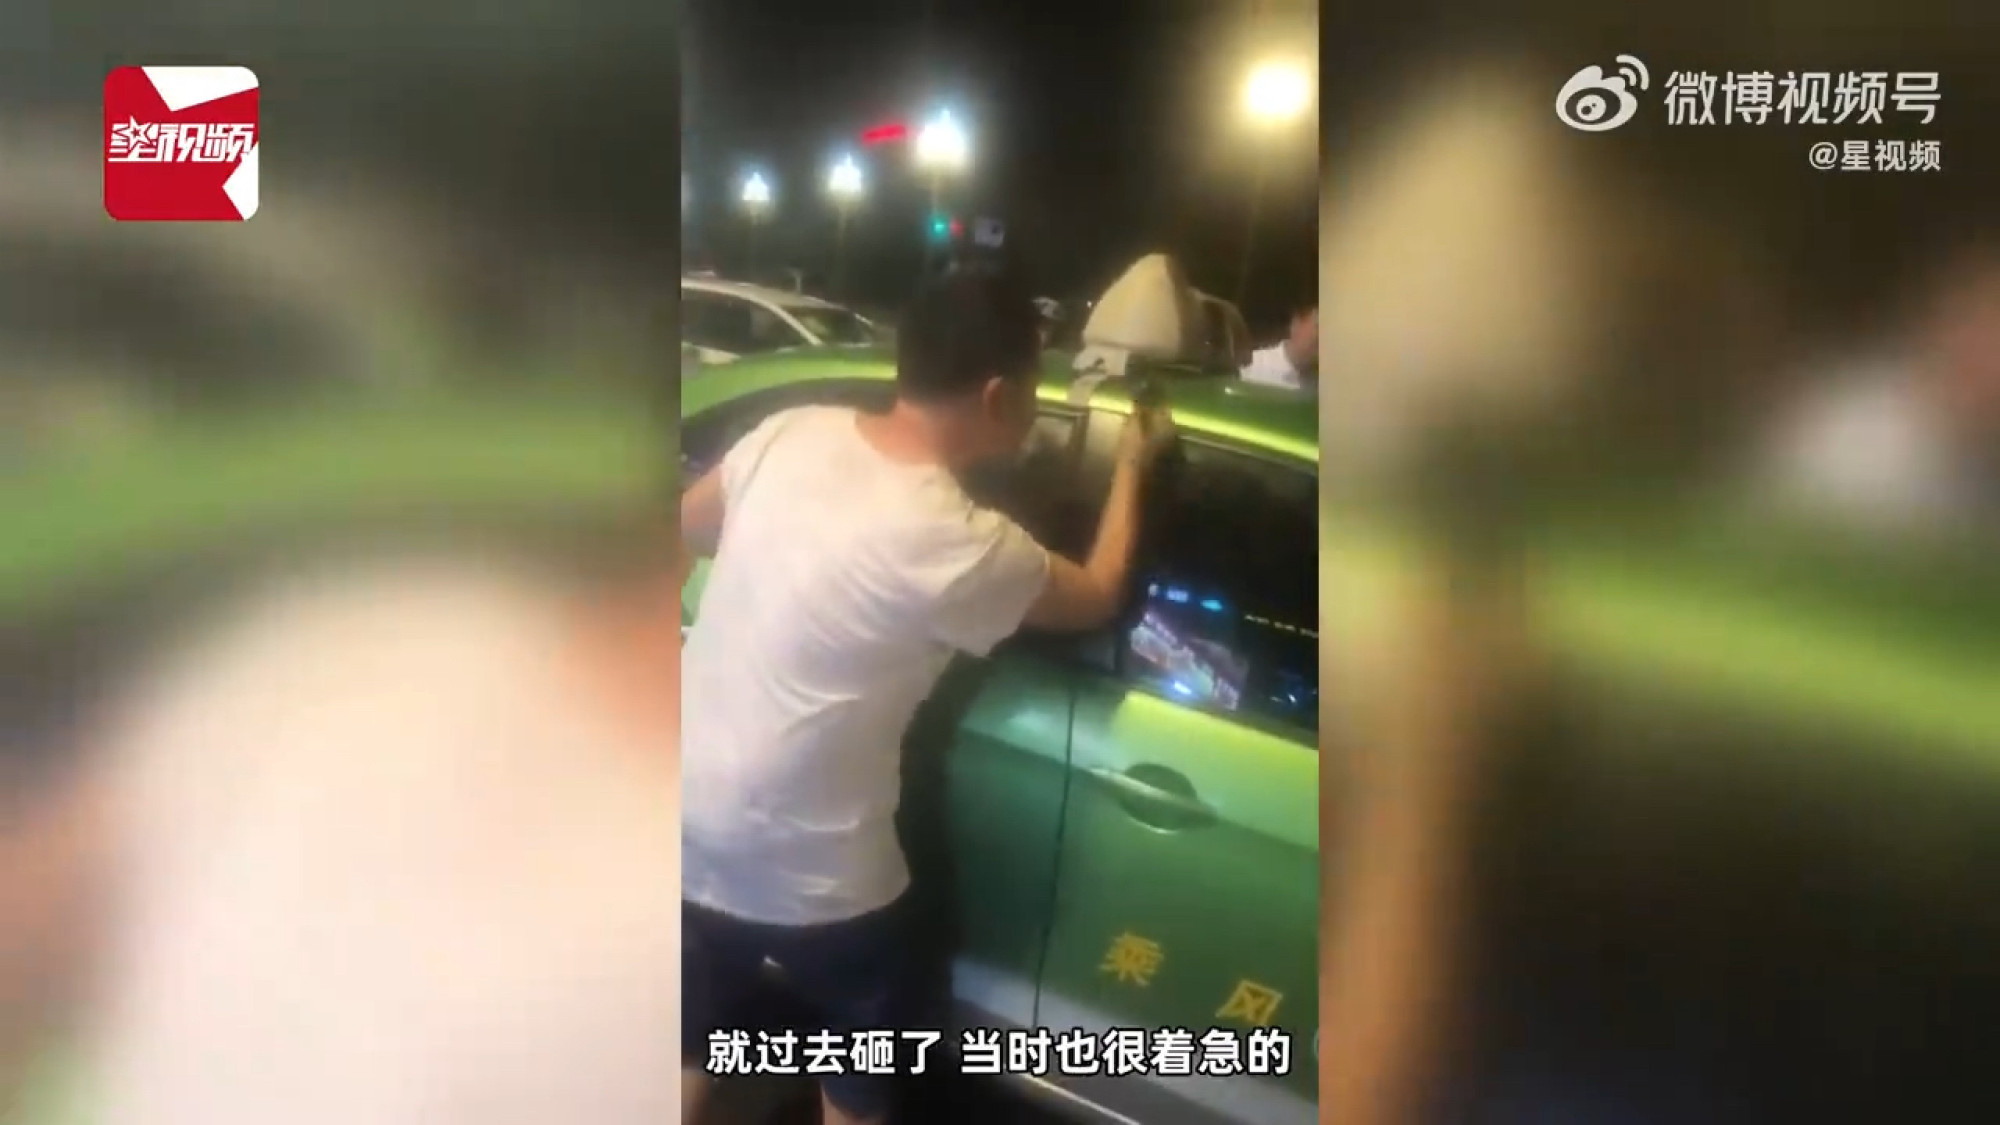 The passer-by was so worried about the condition of the child trapped inside, he smashed the taxi window without the parents’ permission. Photo: Baidu/@White Deer Video